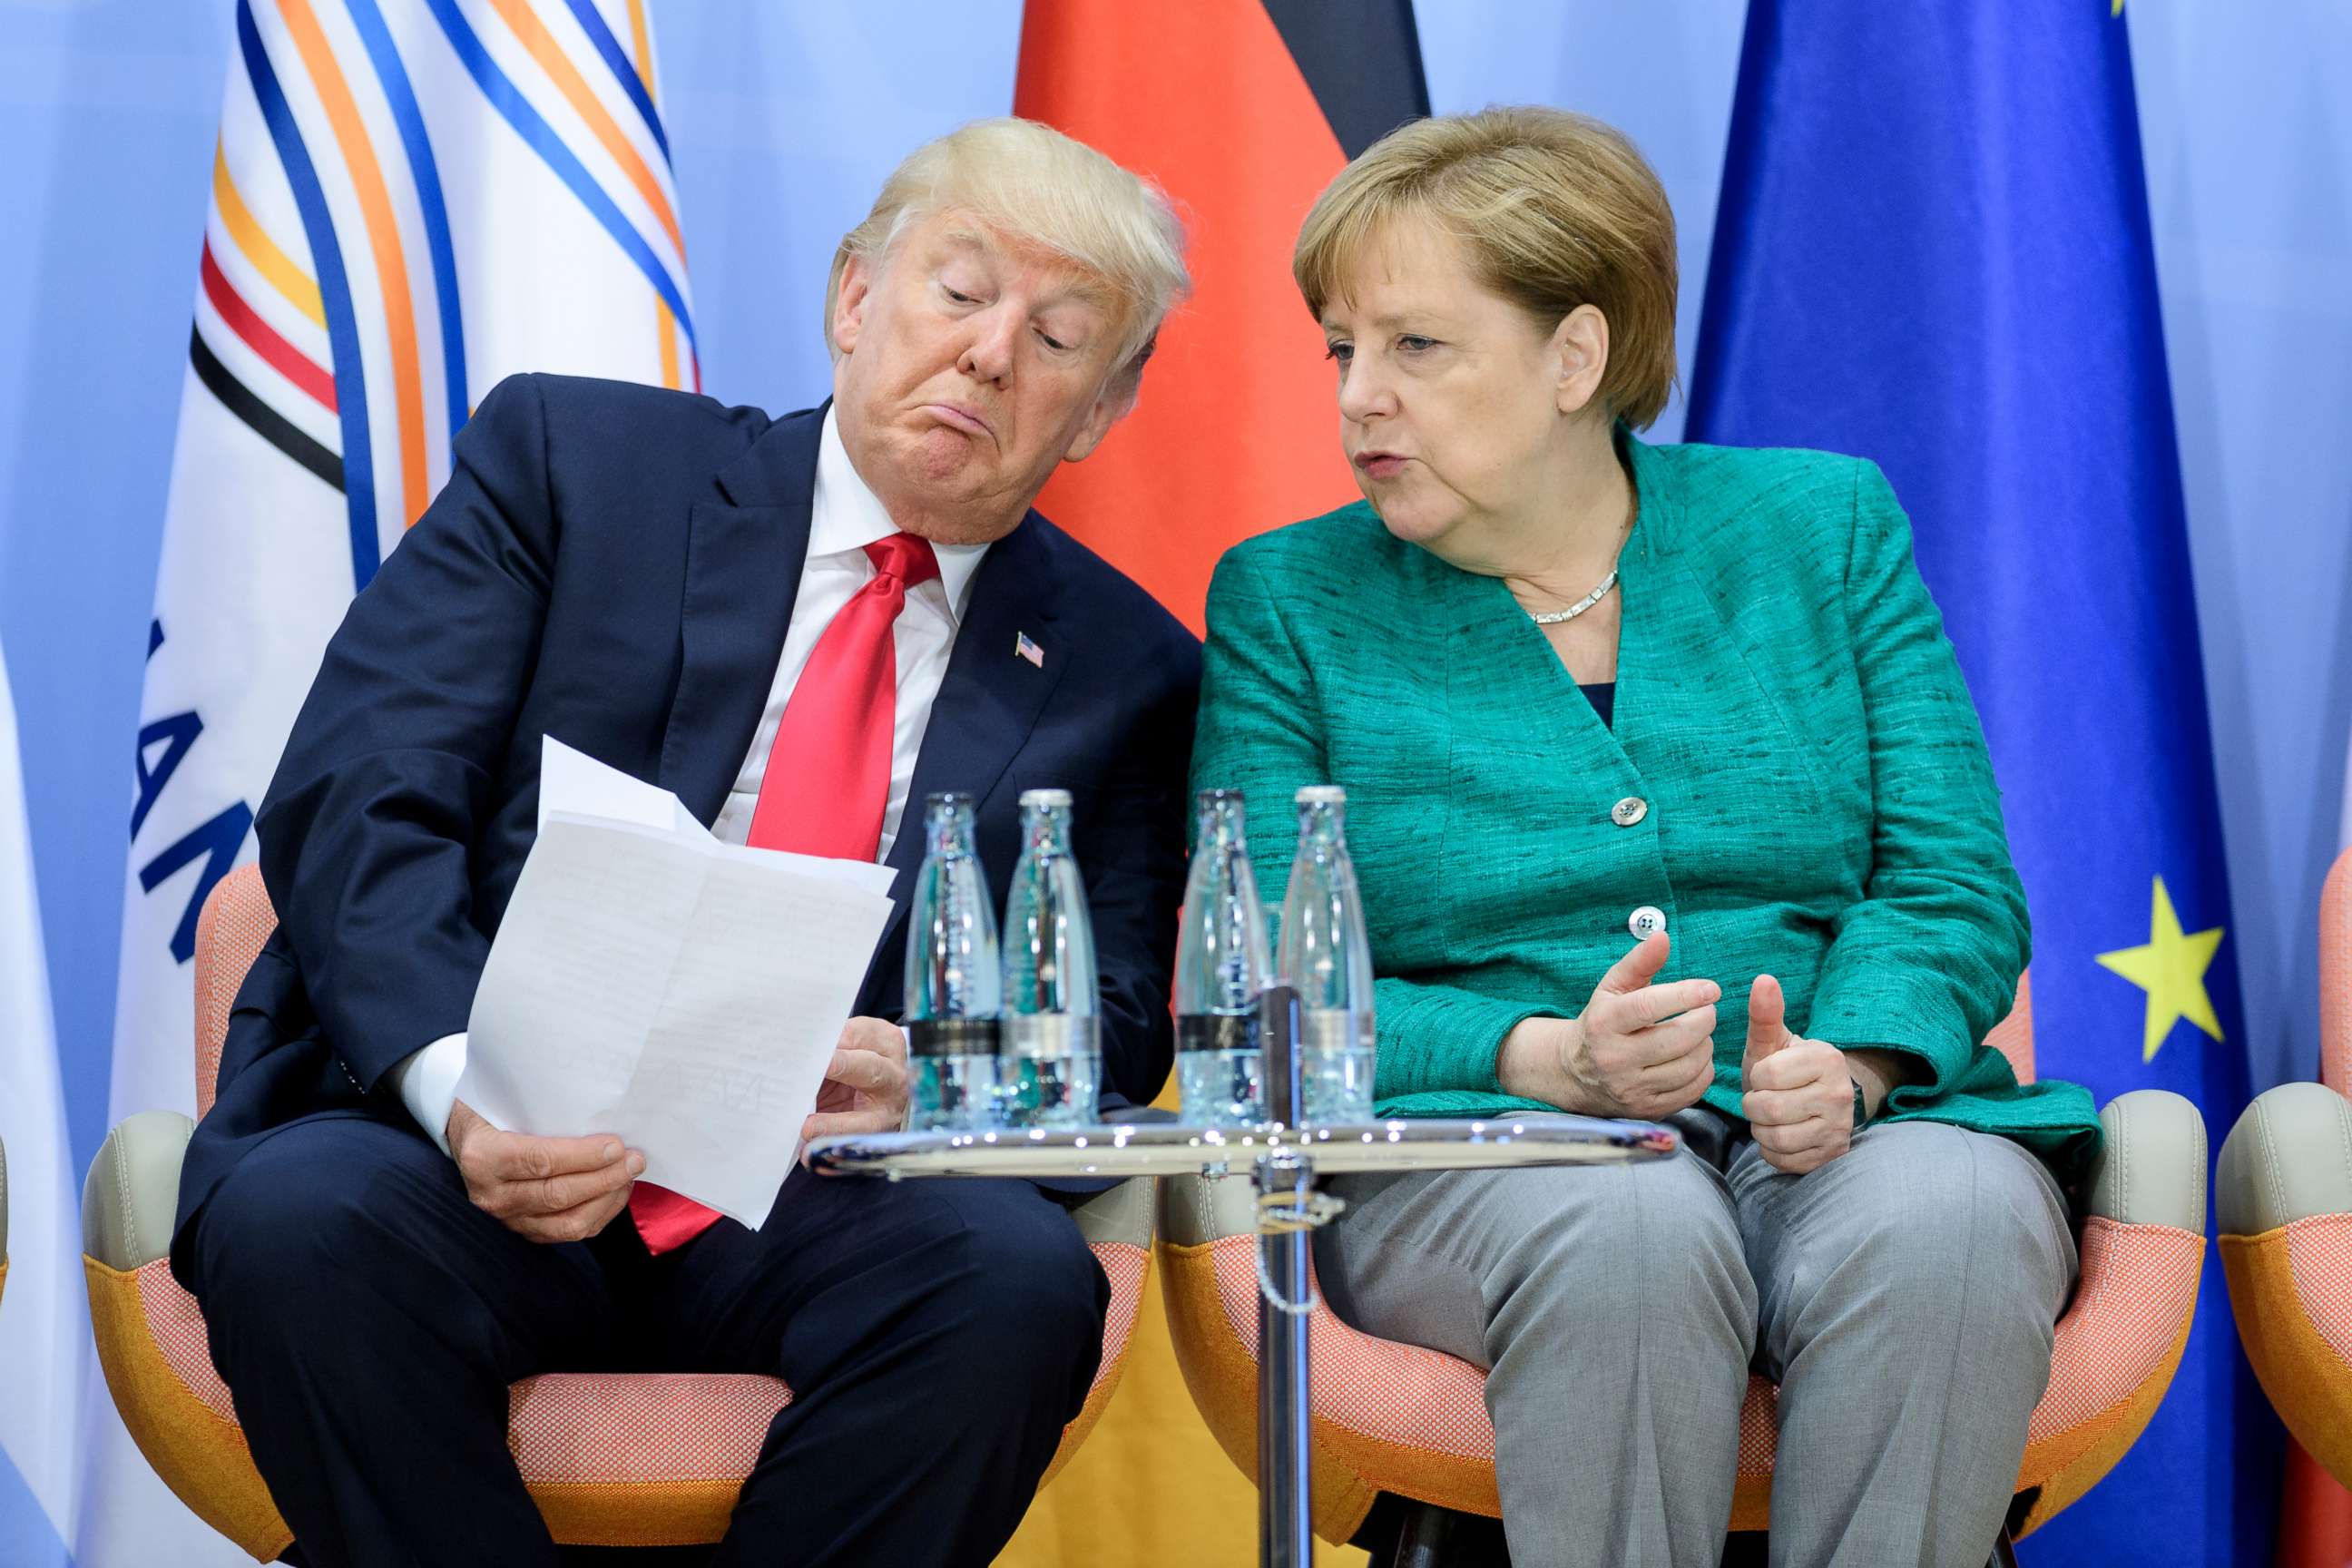 PHOTO: President Donald Trump and German Chancellor Angela Merkel attend a panel discussion on the second day of the G20 summit, July 8, 2017 in Hamburg, Germany.